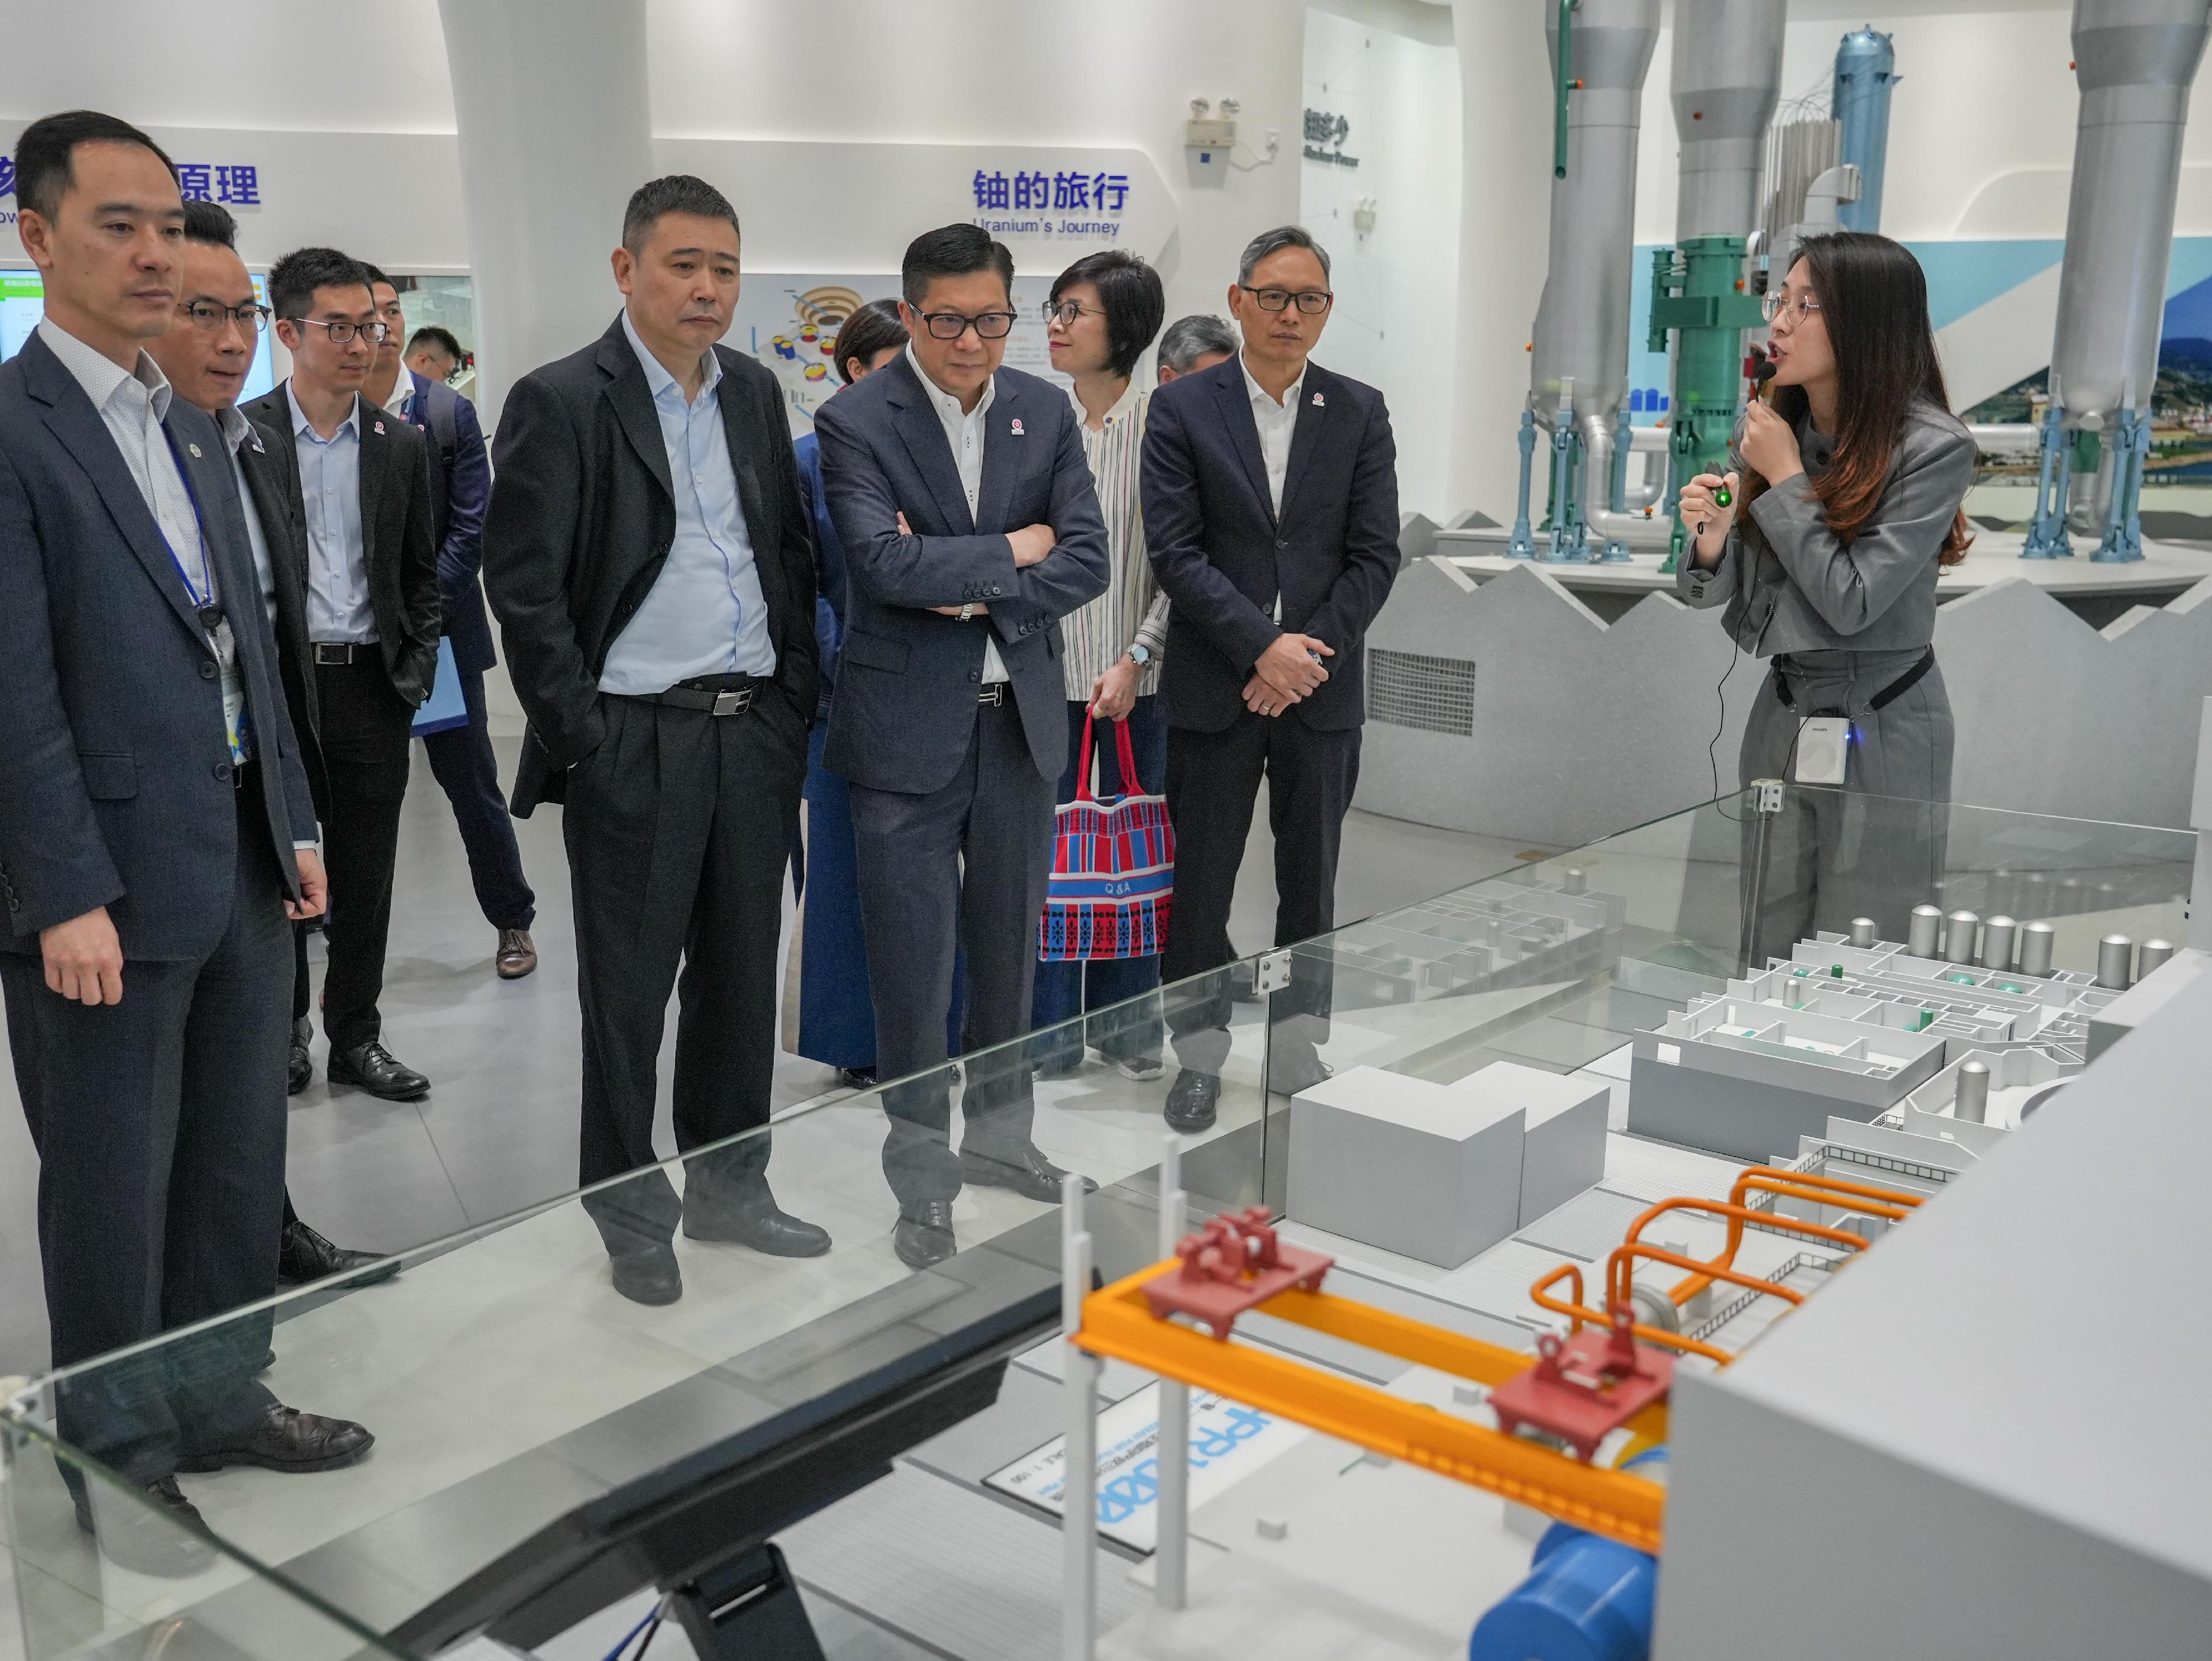 The Secretary for Security, Mr Tang Ping-keung (fourth right), today (April 20) visited the Daya Bay Nuclear Power Site in Shenzhen. Photo shows Mr Tang, accompanied by the Senior Vice President of China General Nuclear Power Corporation (CGNPC), Mr Guo Limin (fourth left), being briefed by the personnel of the CGNPC on the nuclear power site.